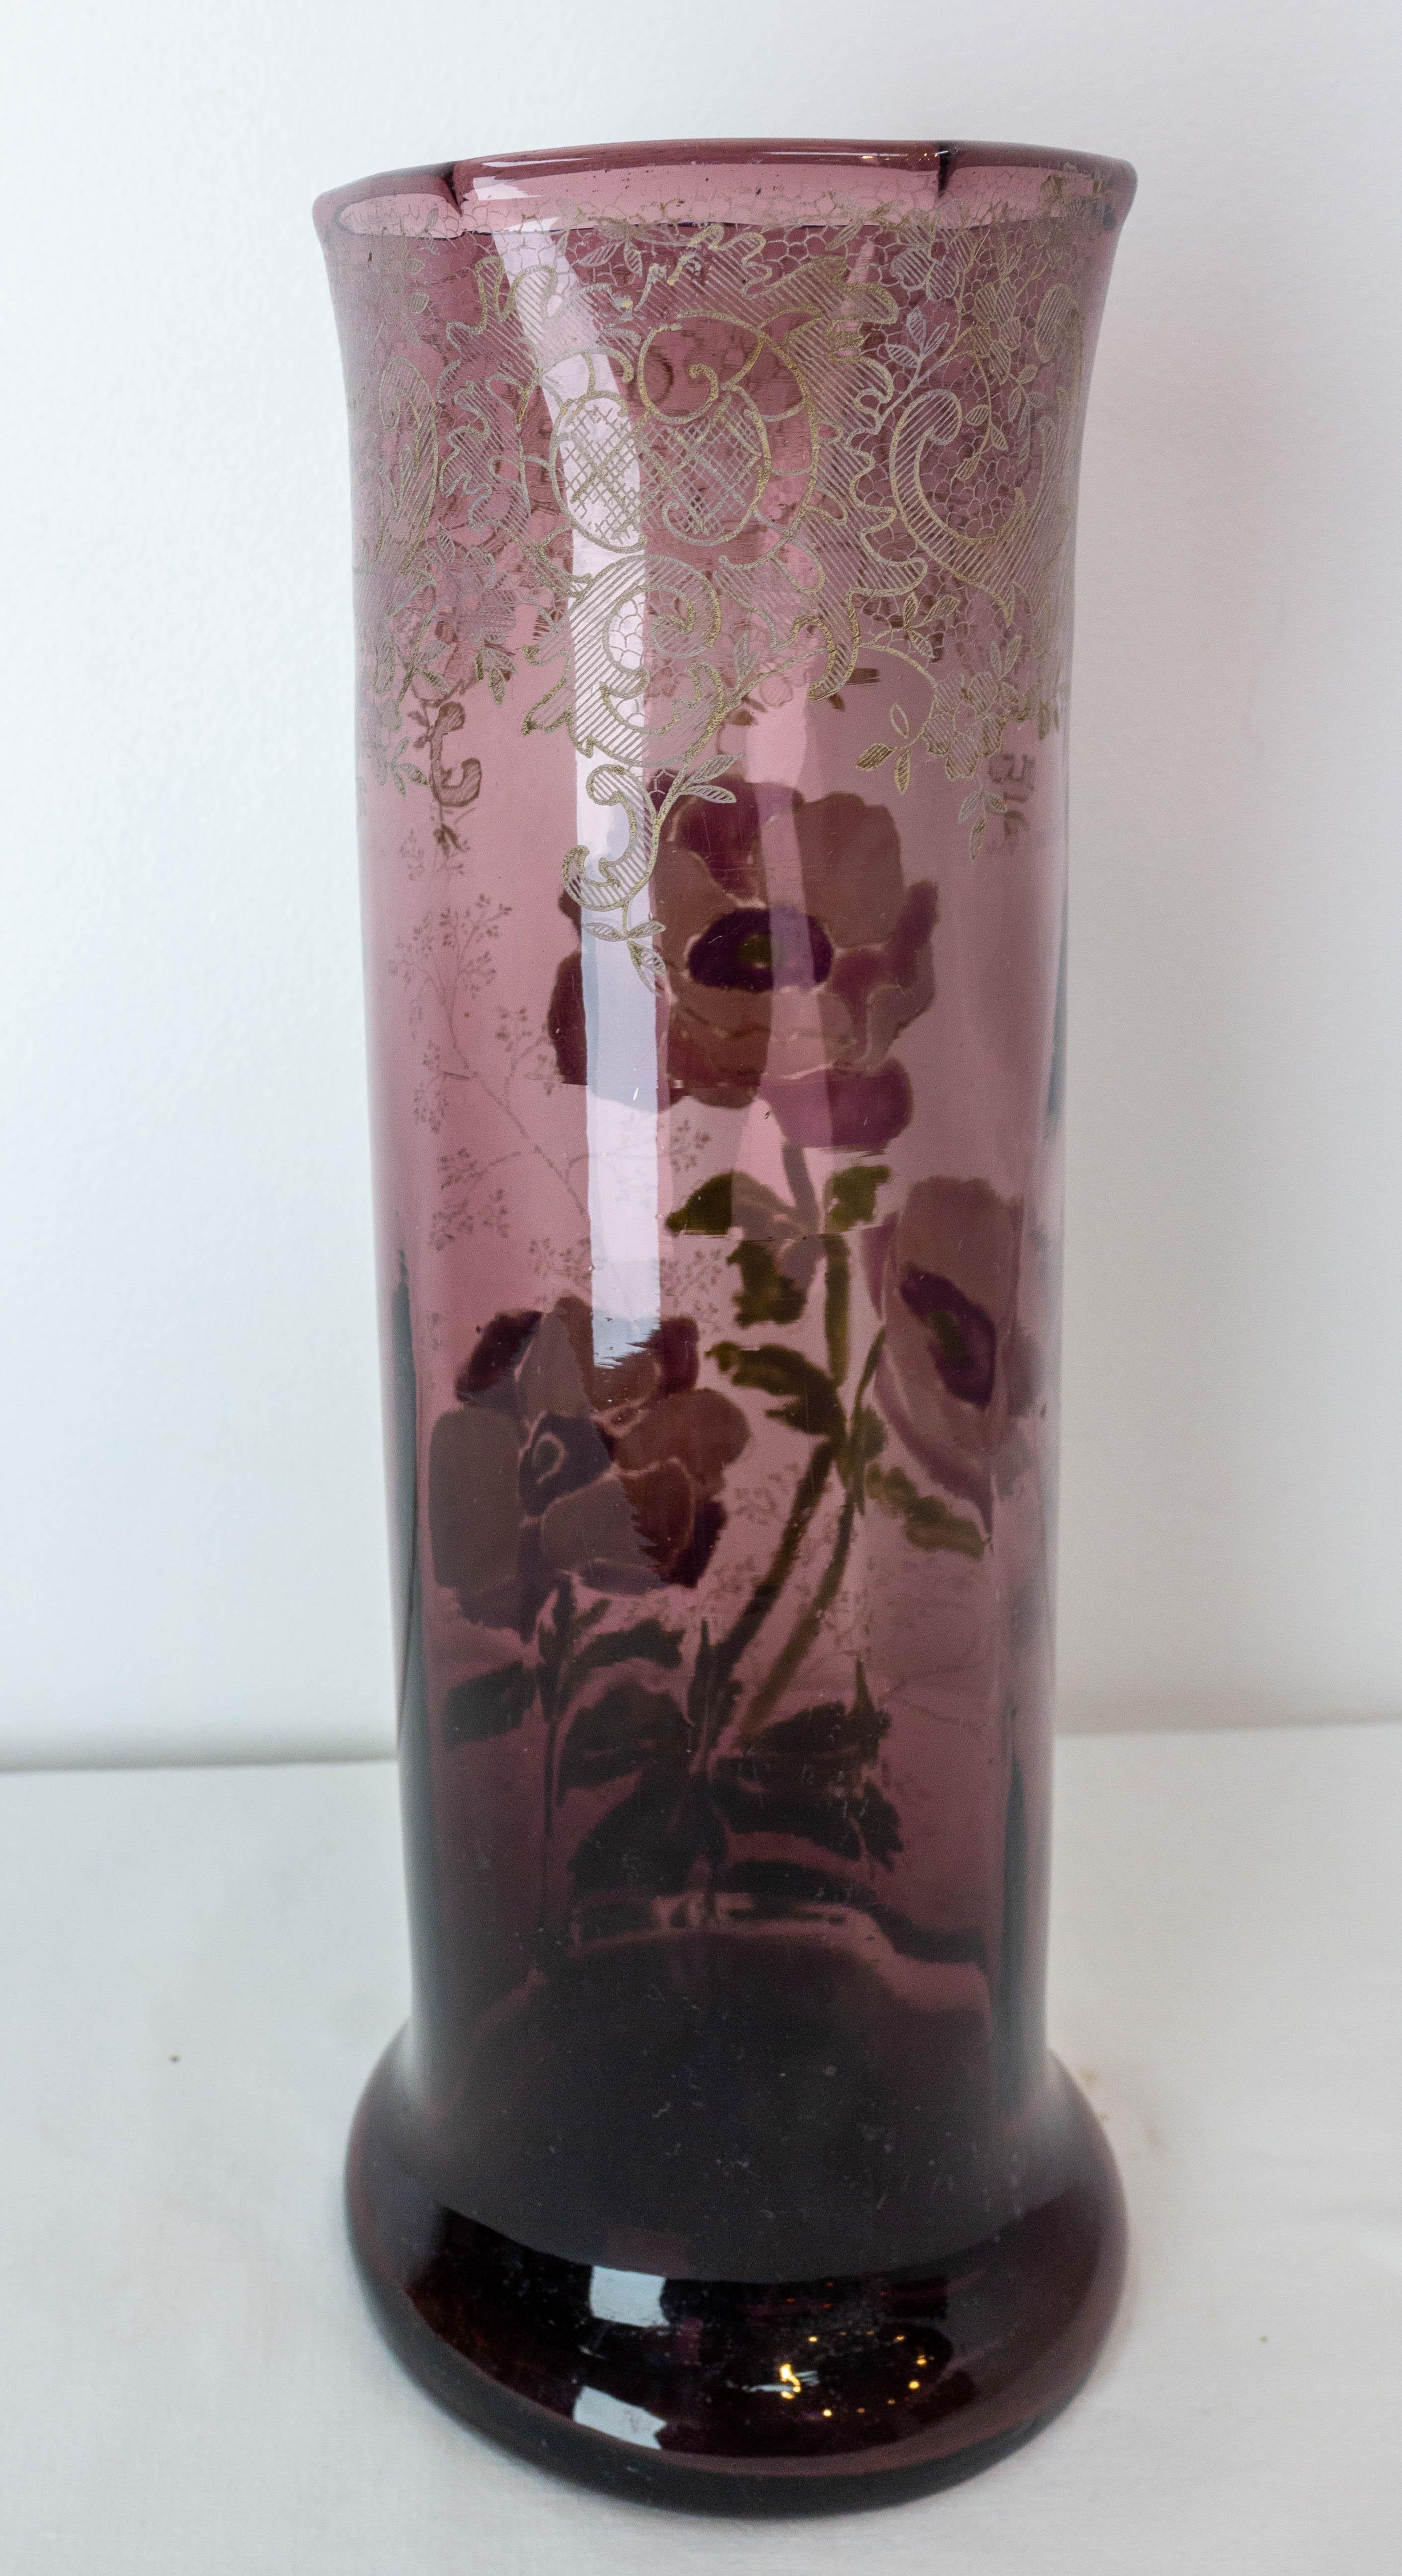 French Enamelled Glass Vase with Flowers Decoration Legras Art Nouveau, c. 1900 In Good Condition For Sale In Labrit, Landes